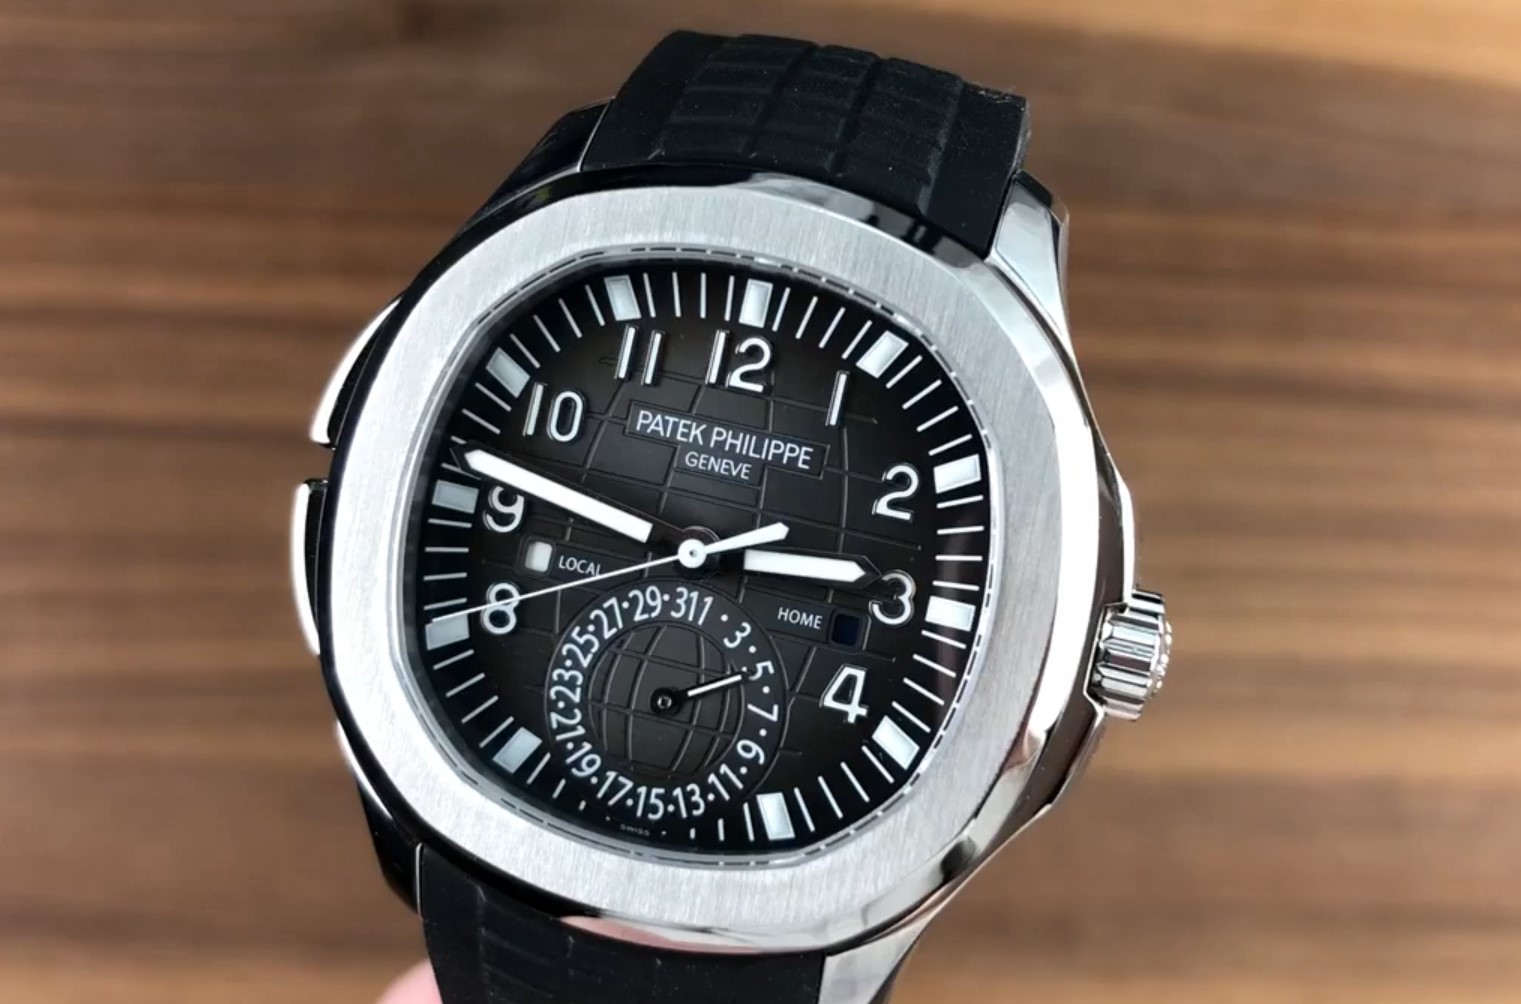 Patek Philippe - I heard several opposite comments about the 5164A